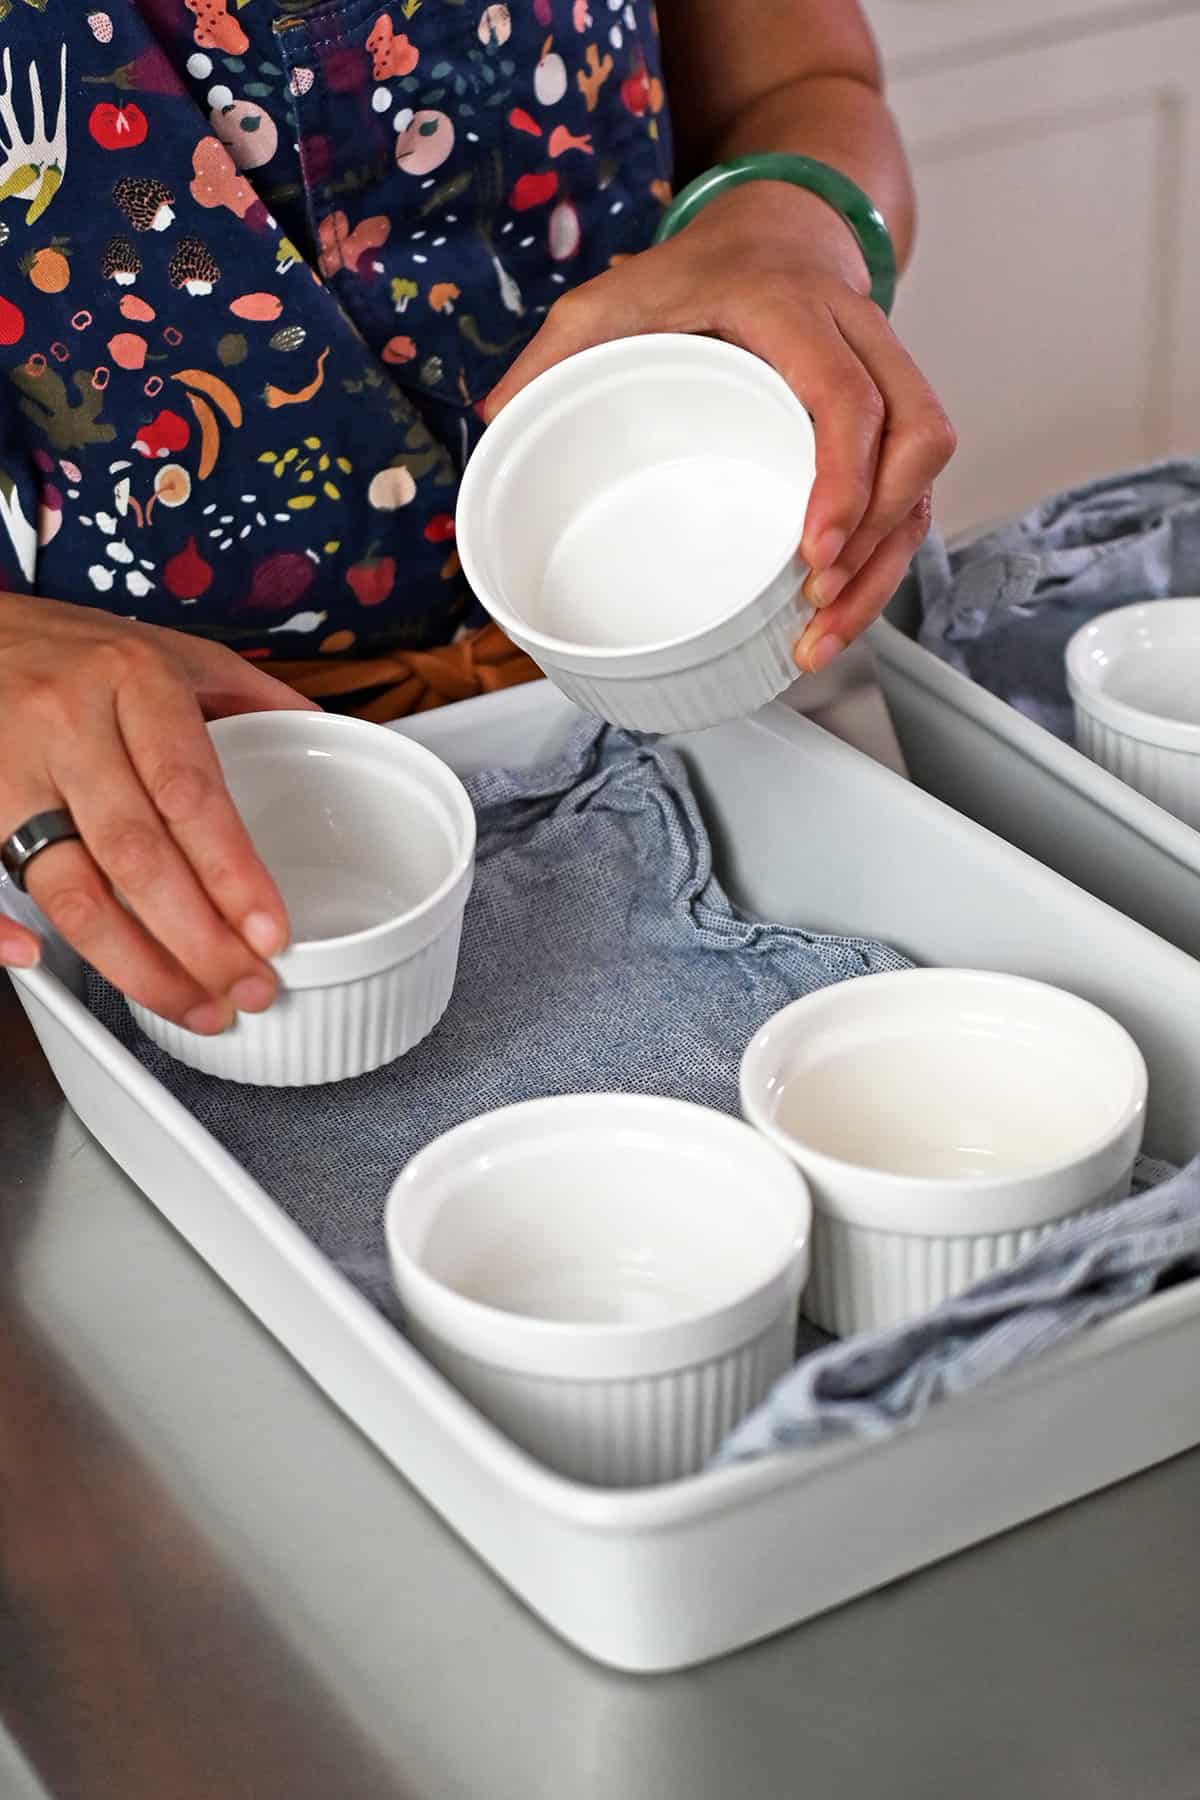 A hand is placing a ramekin into a casserole dish lined with a blue cloth.